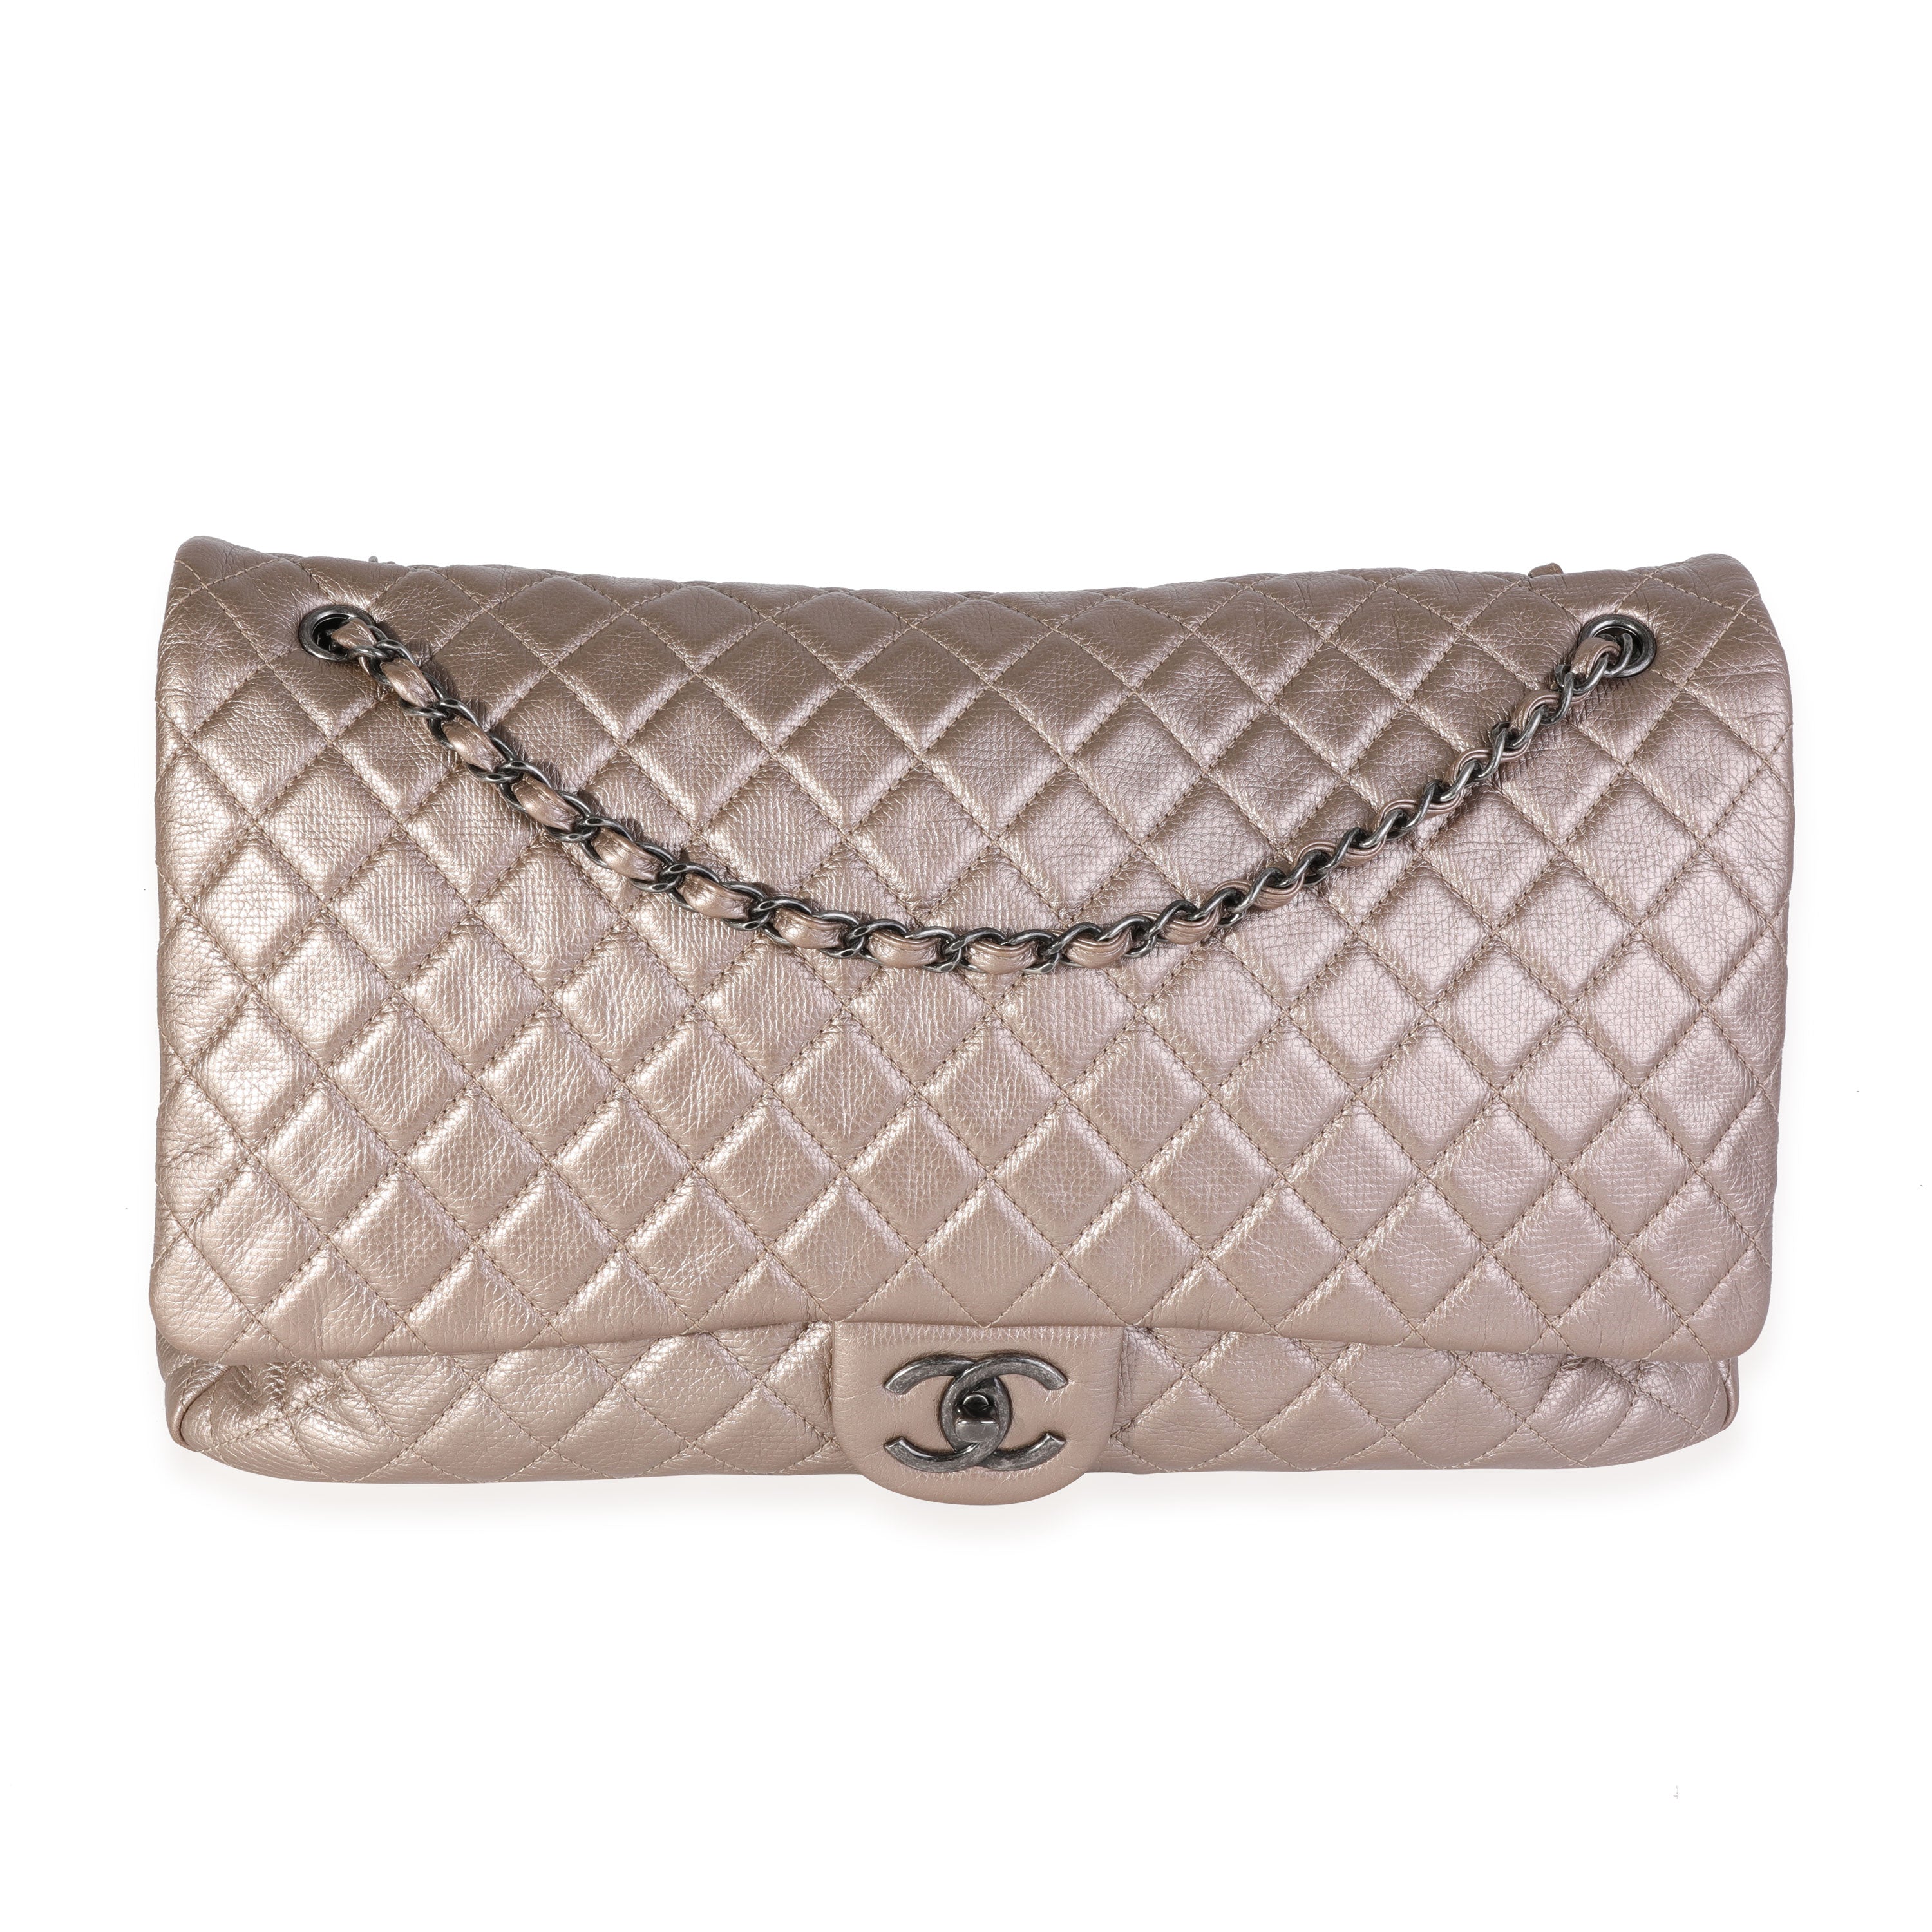 Chanel Metallic Gold Quilted Calfskin Chanel Airlines XXL Travel Flap Bag, myGemma